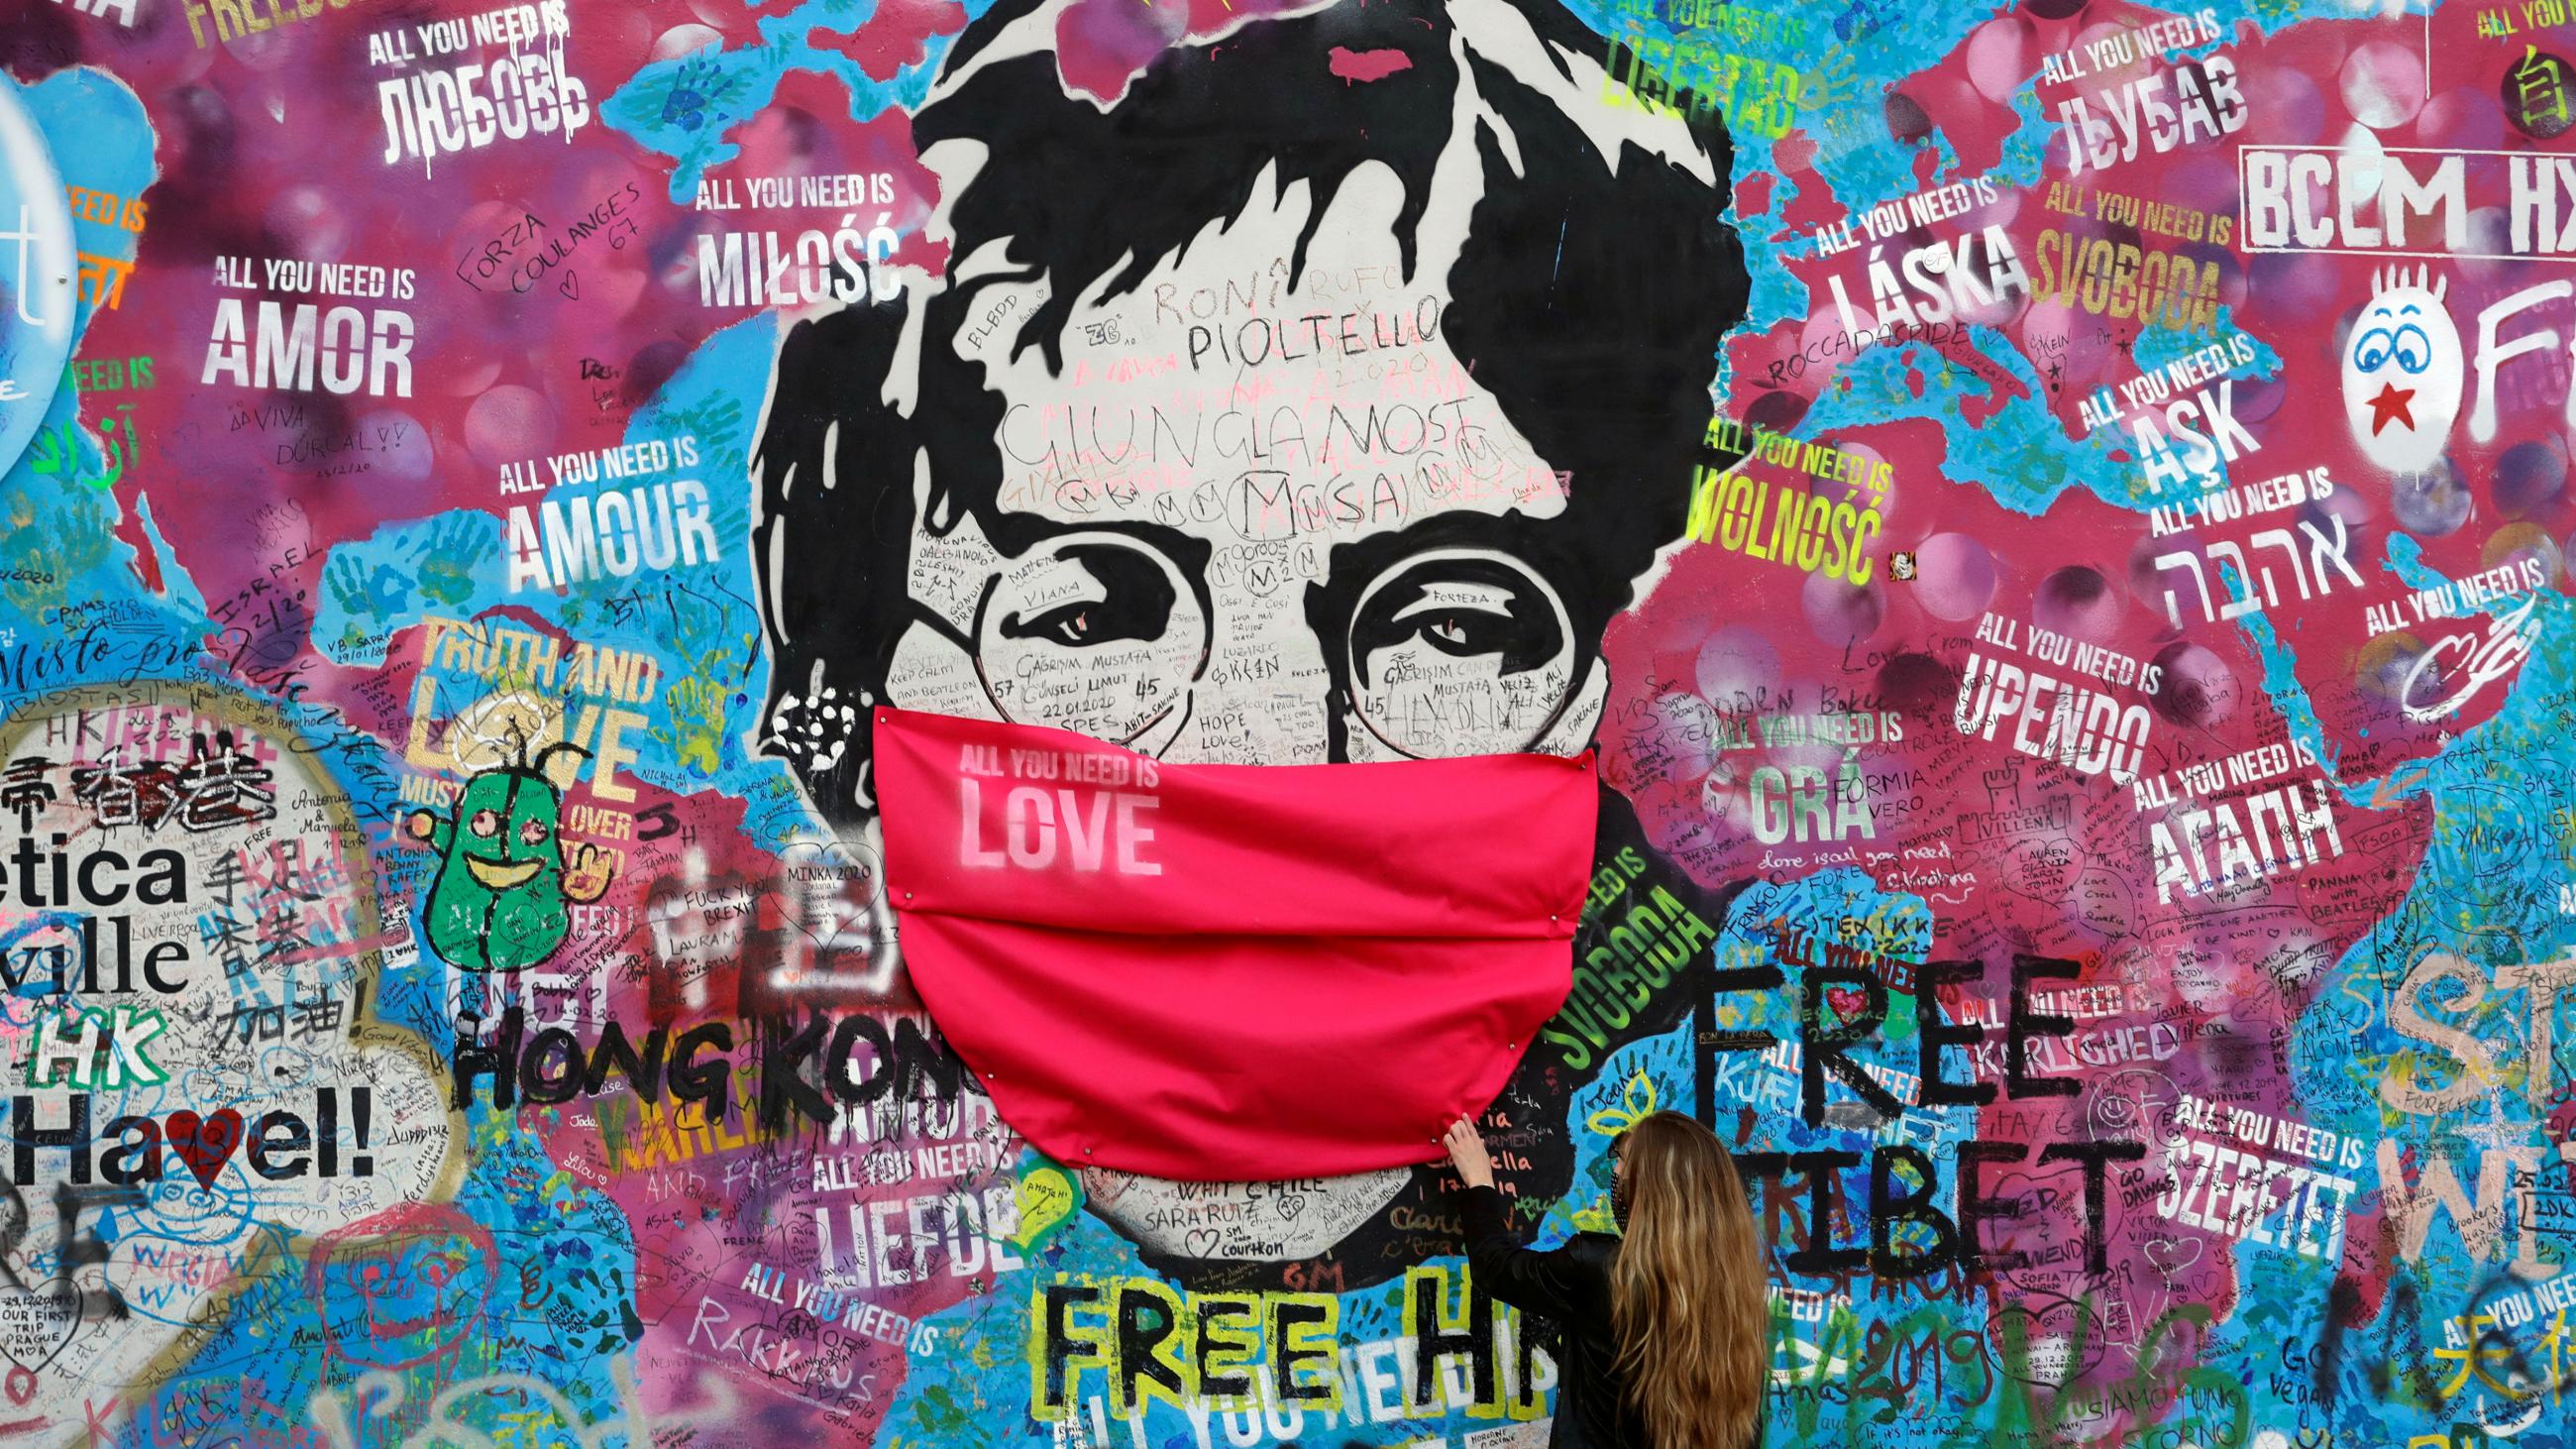 A woman wearing a face mask during the COVID-19 pandemic touches the legendary graffiti-covered John Lennon Wall in Prague, Czech Republic, on April 6, 2020.